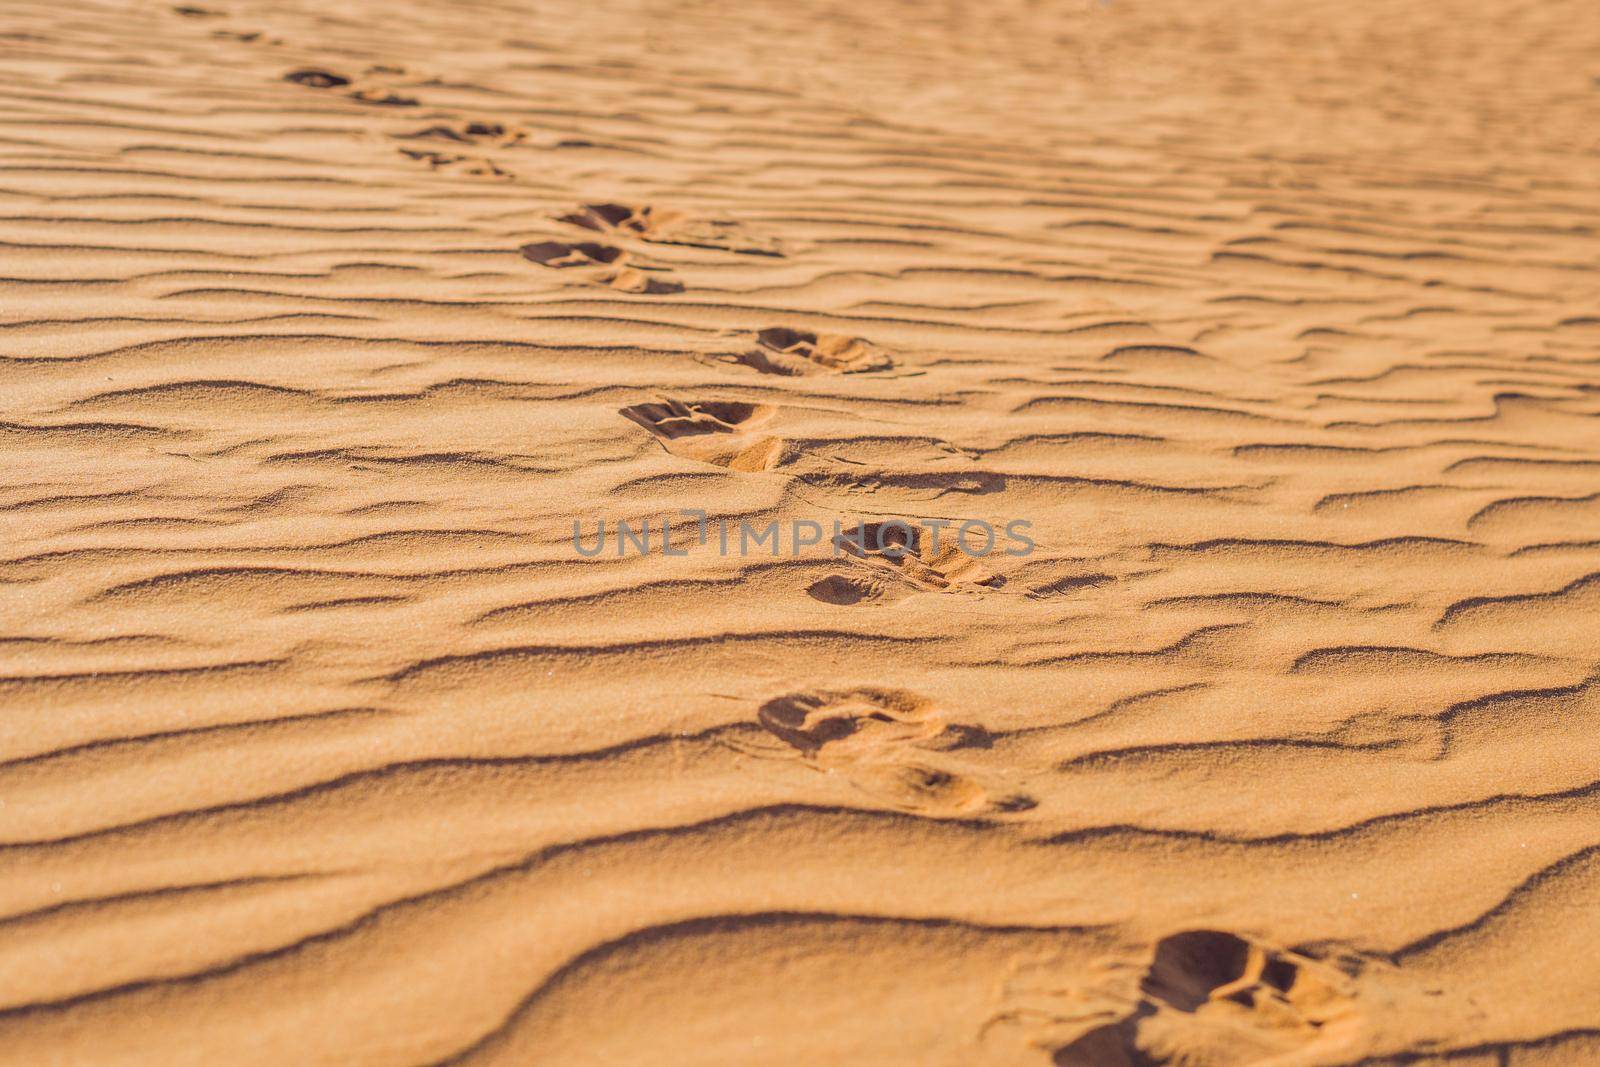 Footprints in the sand in the red desert at Sunrise.